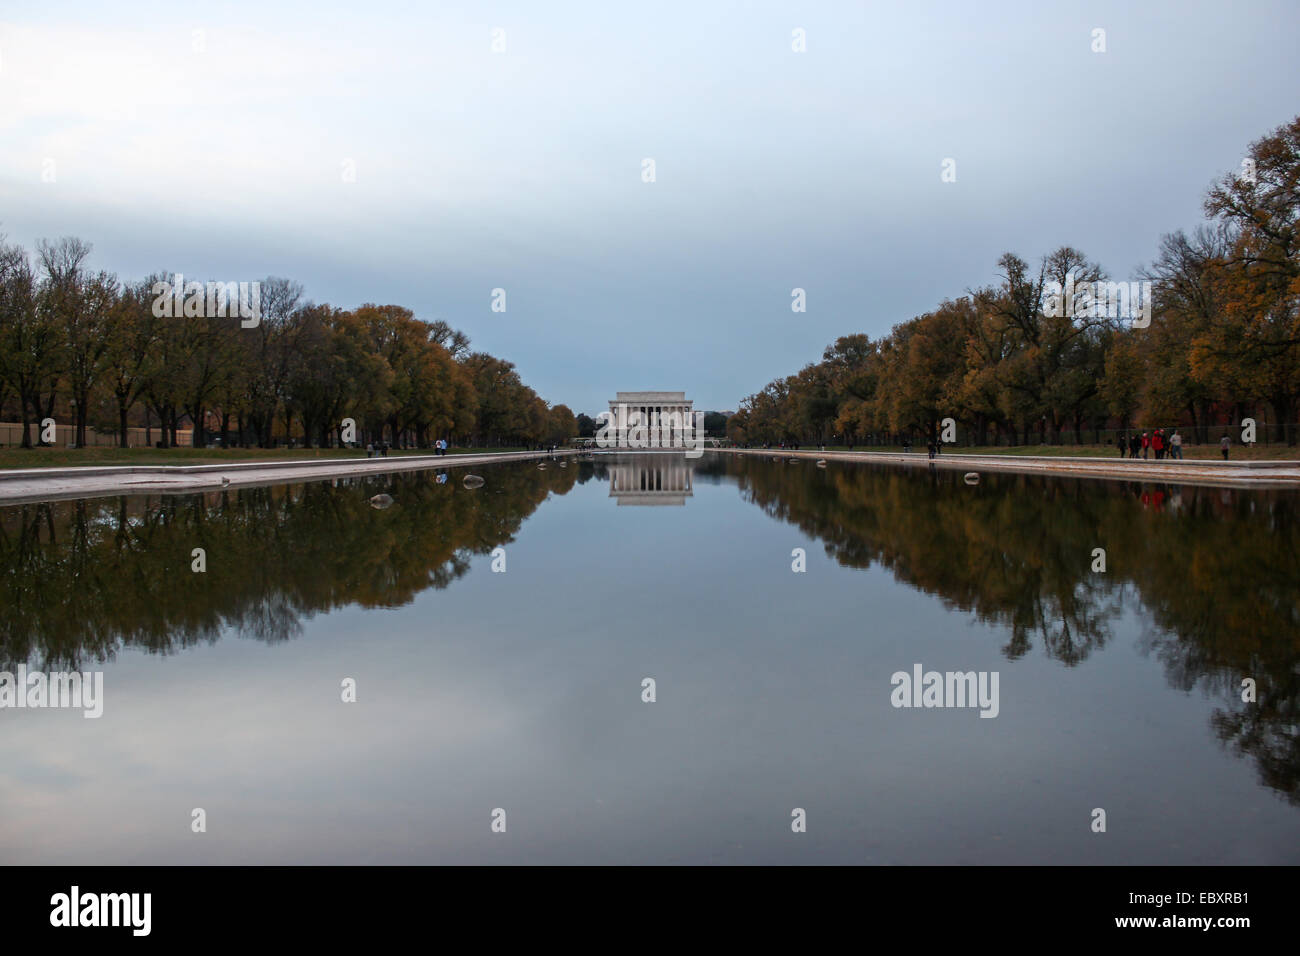 USA: Reflecting Pool and Lincoln Memorial in Washington, DC. Photo from 24. November 2010. Stock Photo